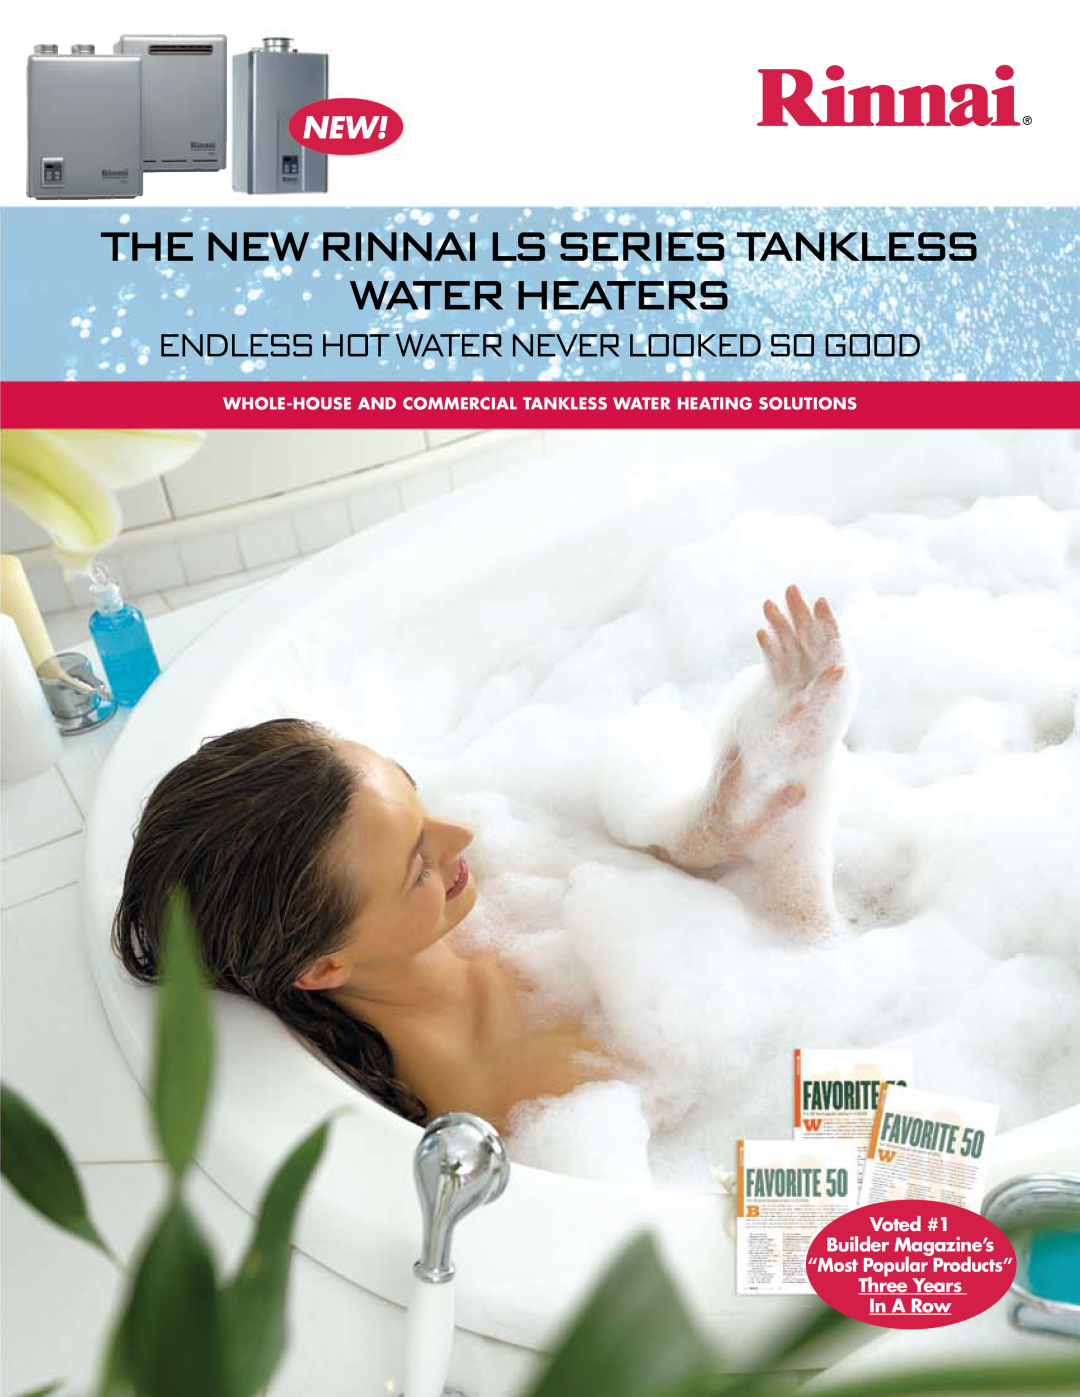 Rinnai R98LS manual The New Rinnai Ls Series Tankless Water Heaters, Endless Hot Water Never Looked So Good 